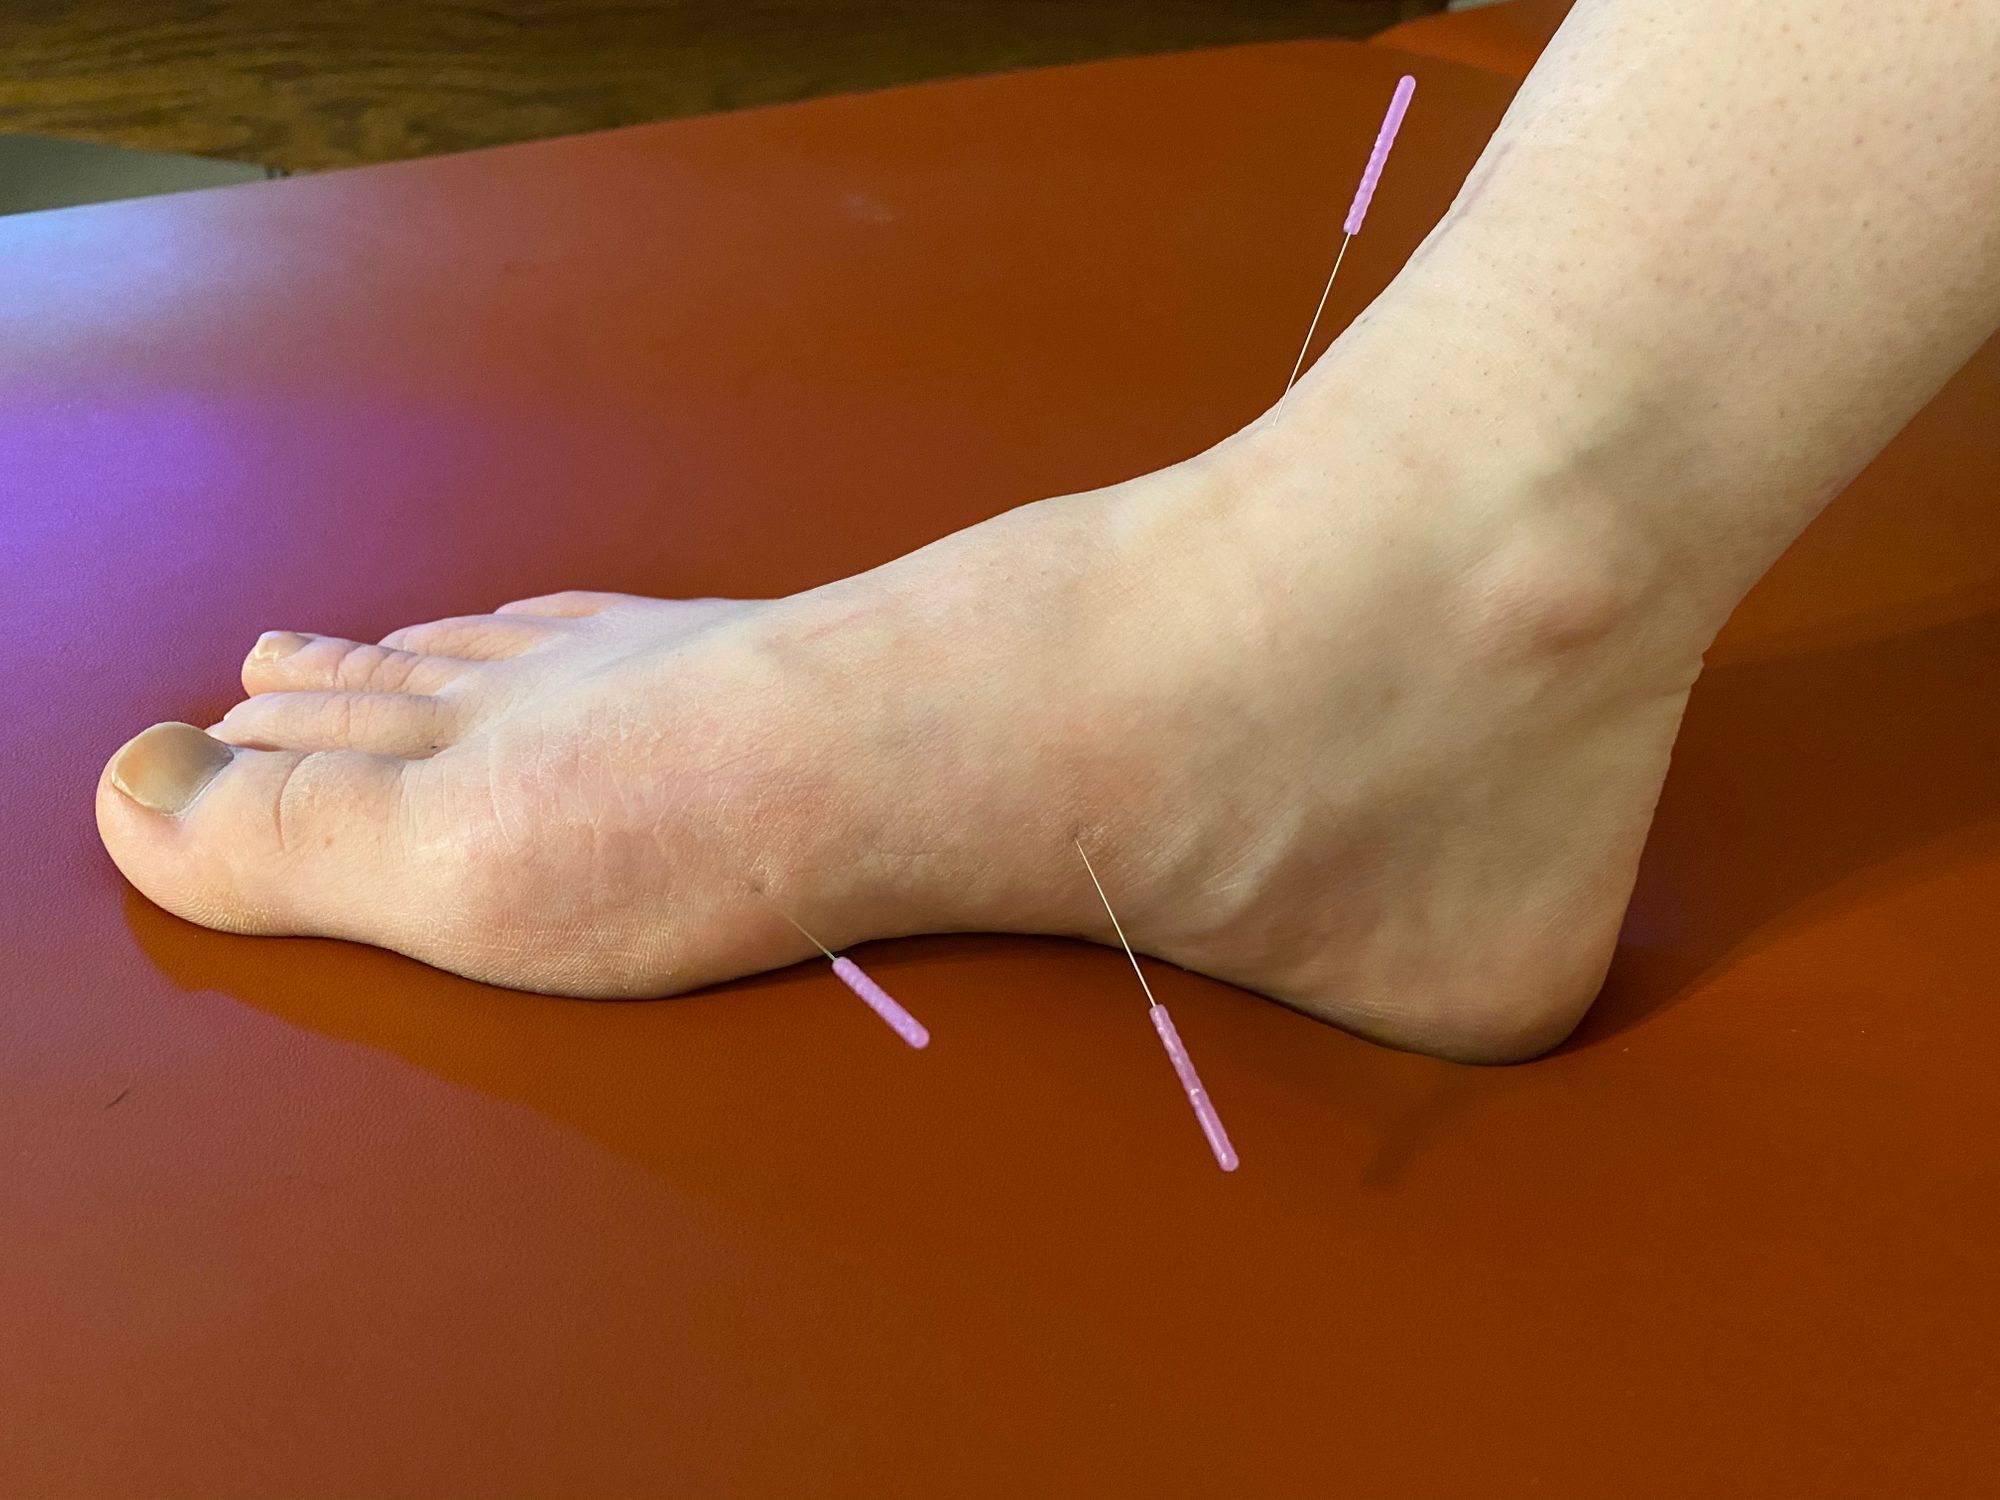 6 Easy Plantar Fasciitis Exercises to Release Foot Pain